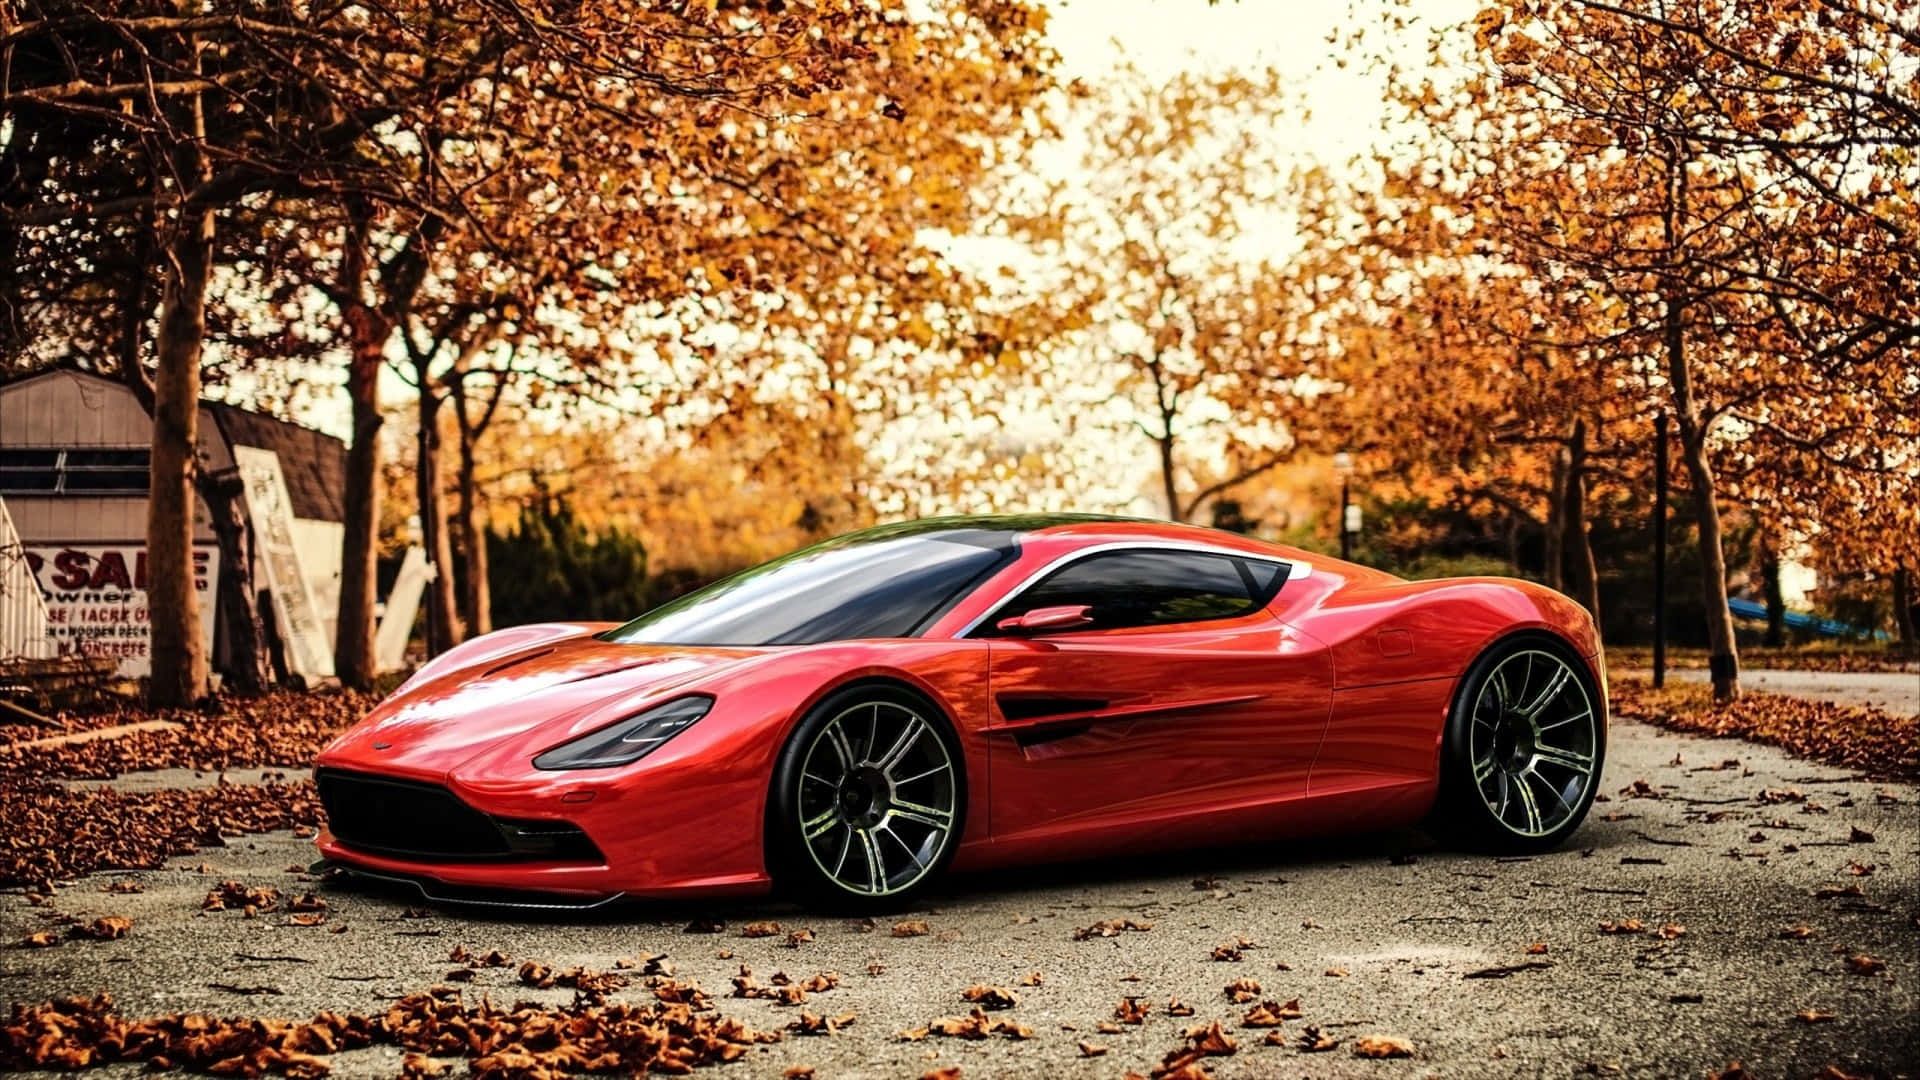 A Red Sports Car Parked In The Autumn Leaves